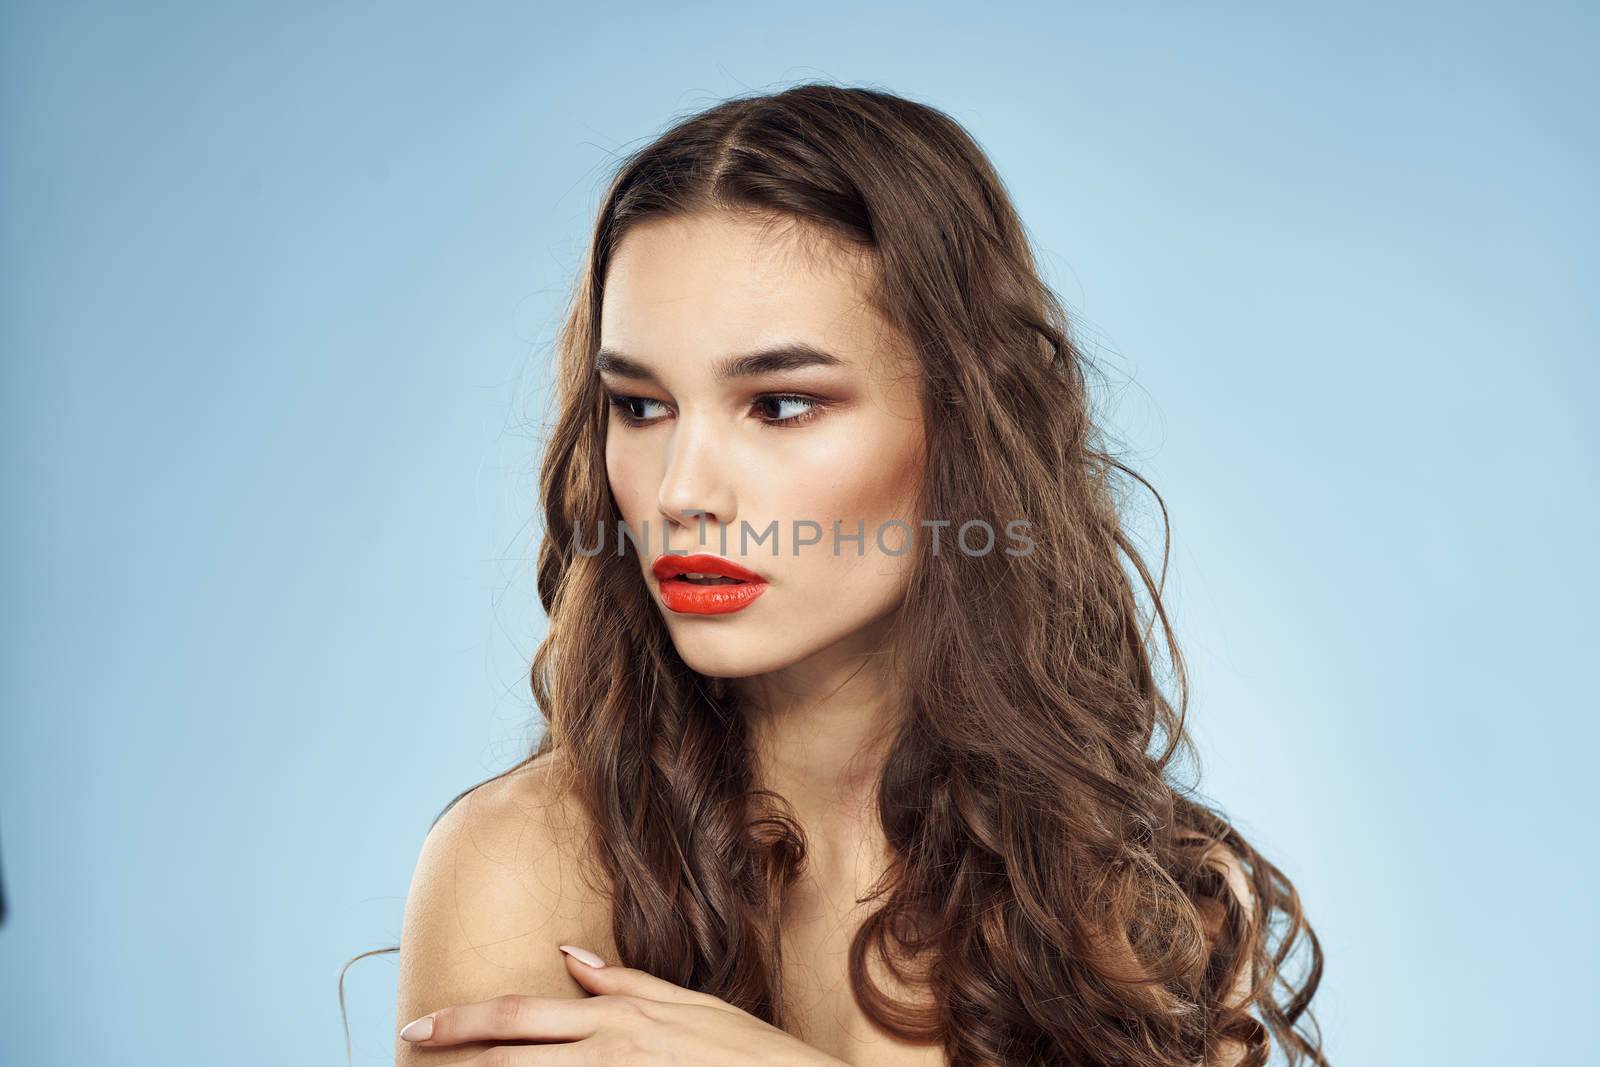 Brunette naked shoulders red lips fashionable hairstyle blue background. High quality photo